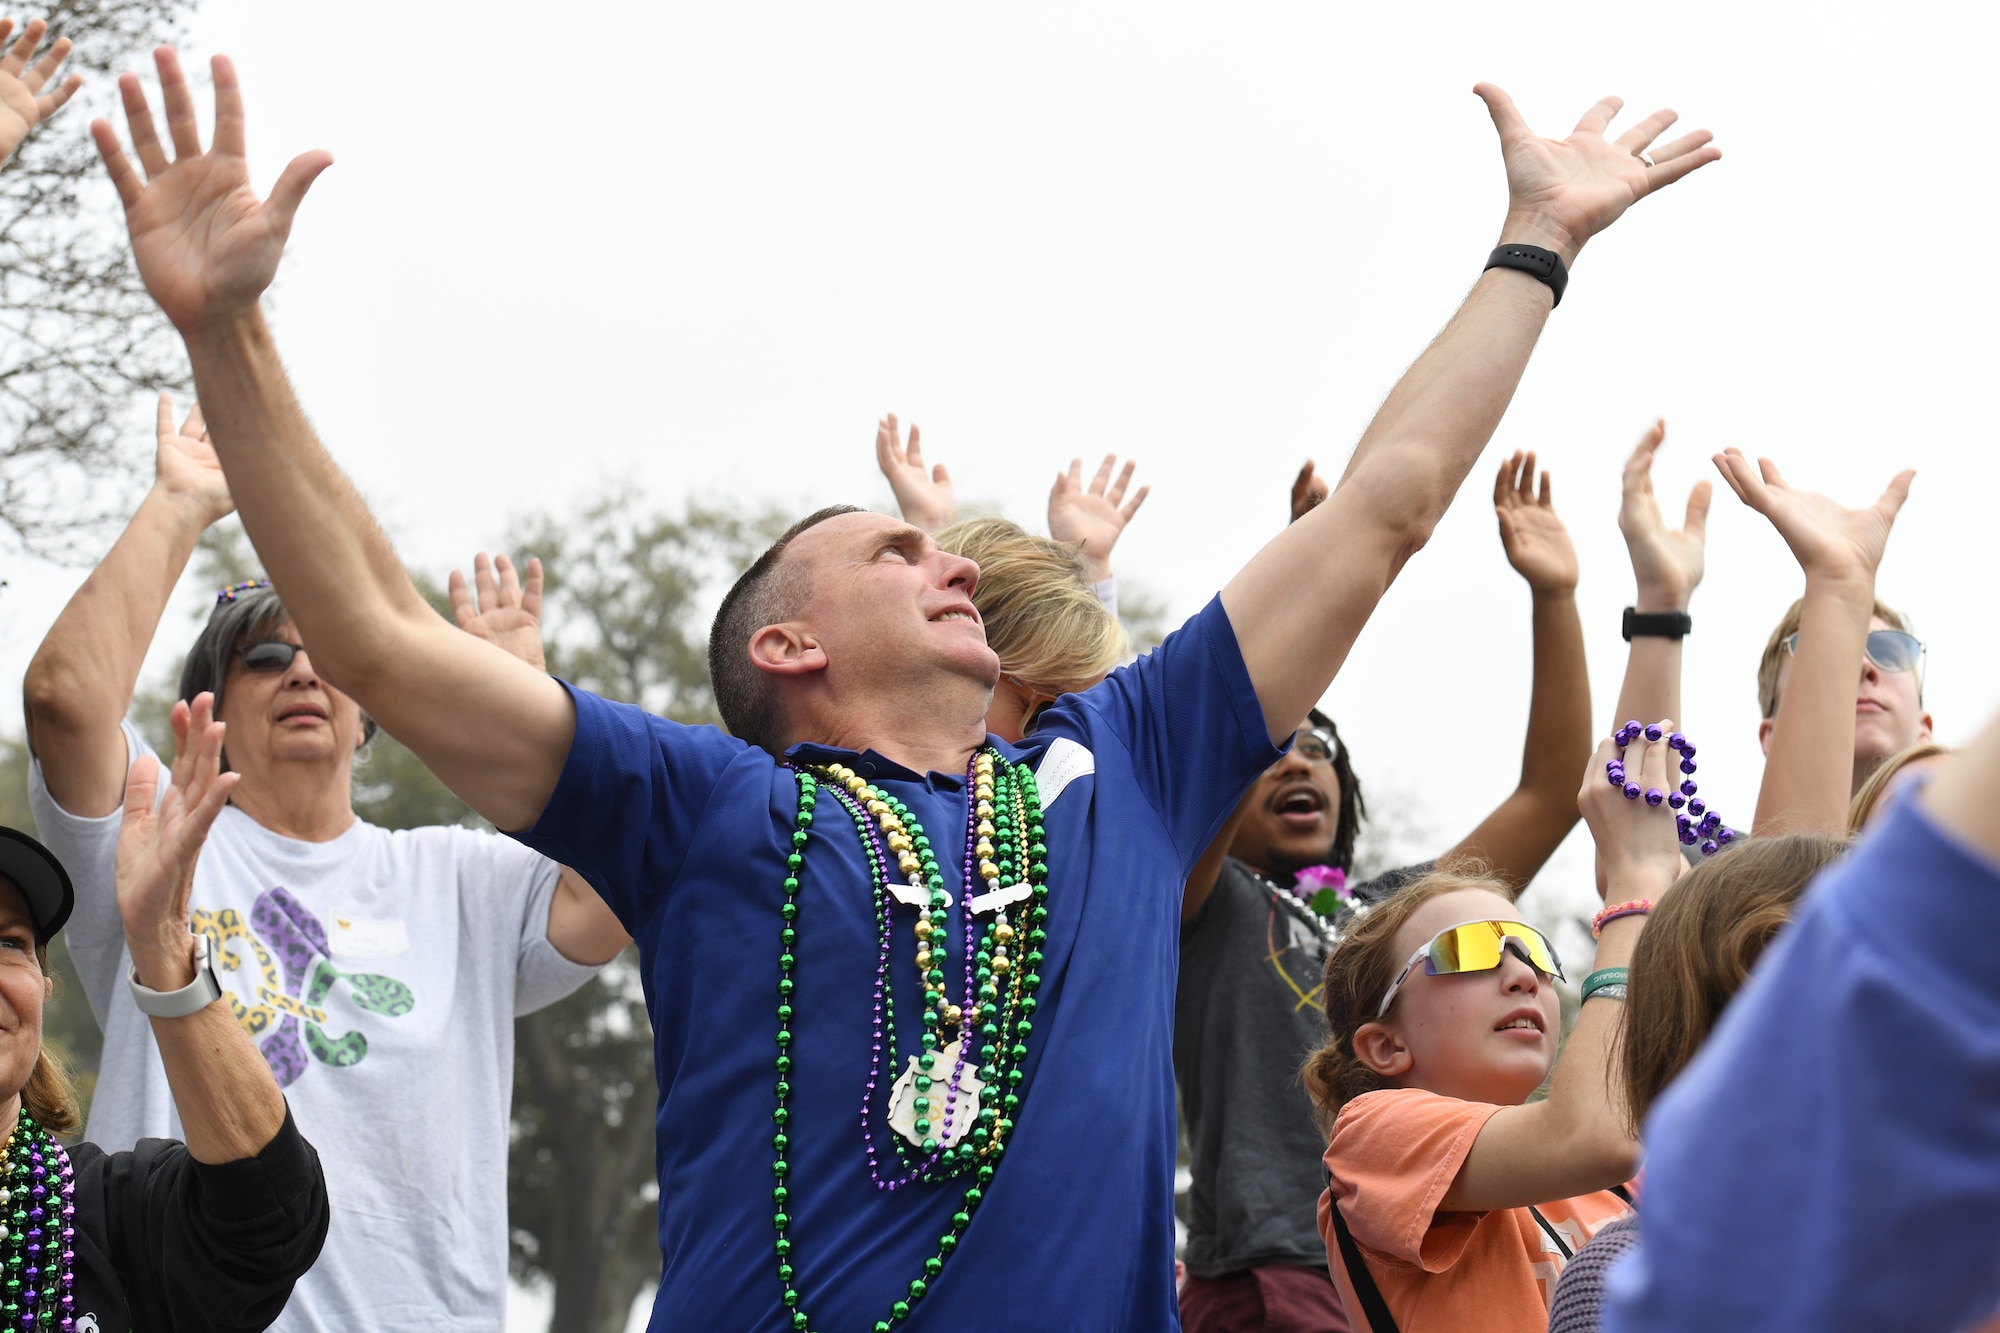 U.S. Air Force Col. Christopher Estridge, 81st Medical Group commander, reaches for bead necklaces tossed to him from floats during the Gulf Coast Carnival Association Mardi Gras parade in Biloxi, Mississippi, Feb. 21, 2023.